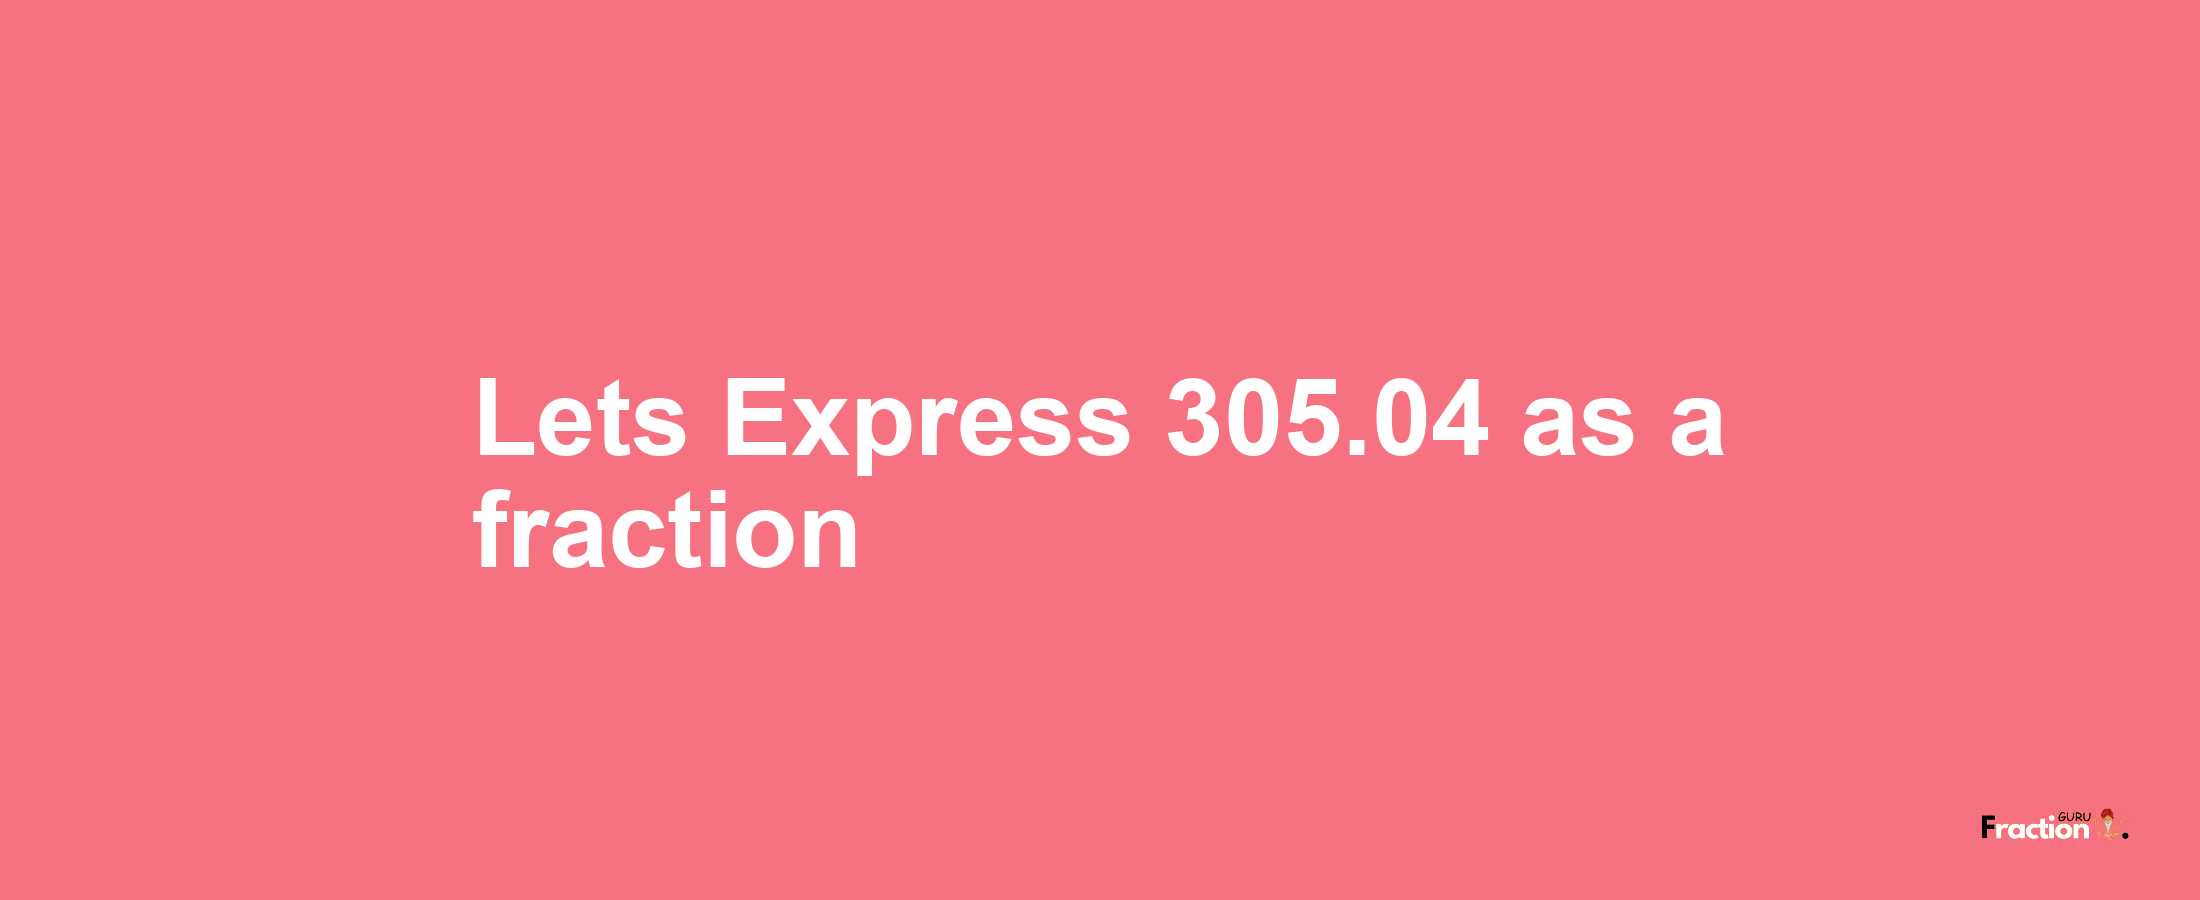 Lets Express 305.04 as afraction